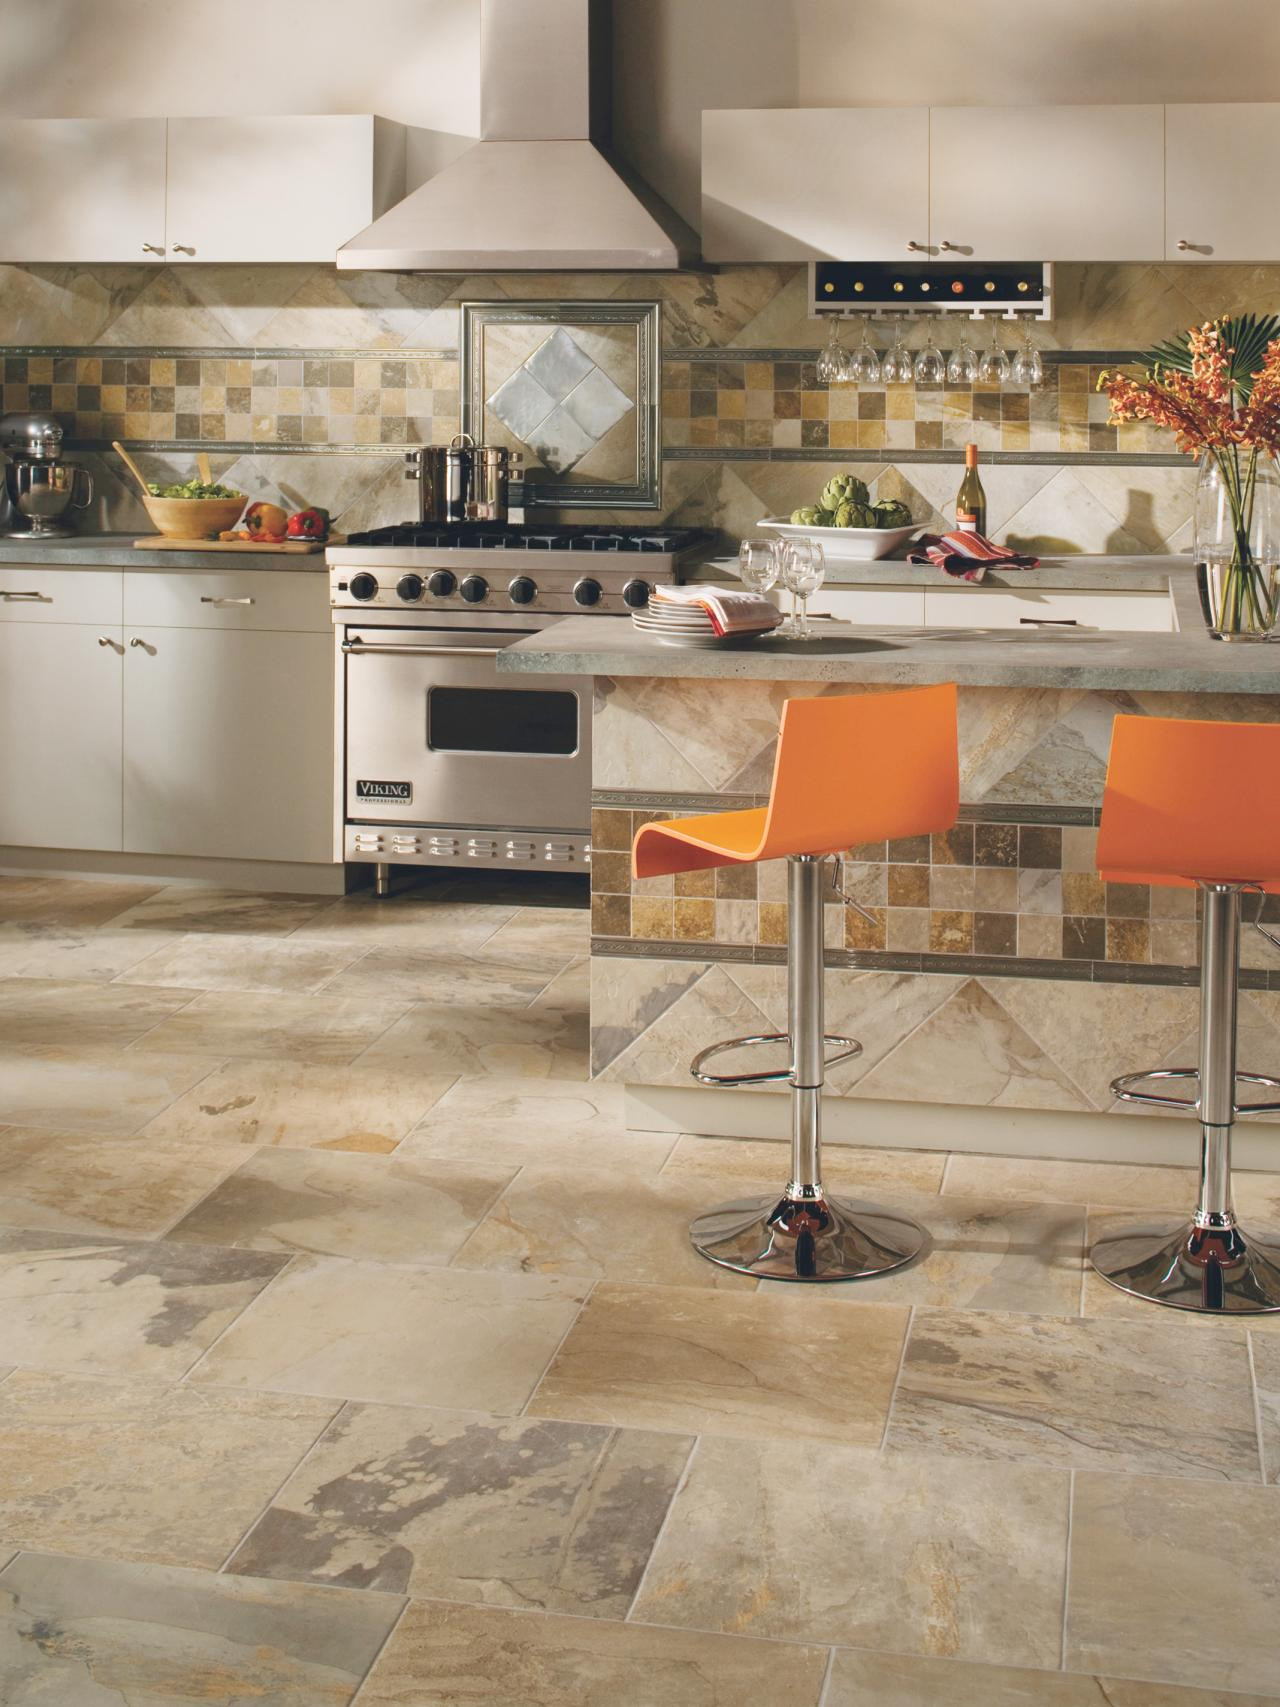 Kitchen Ceramic Tile
 The Pros & Cons Ceramic Flooring For Your Kitchen